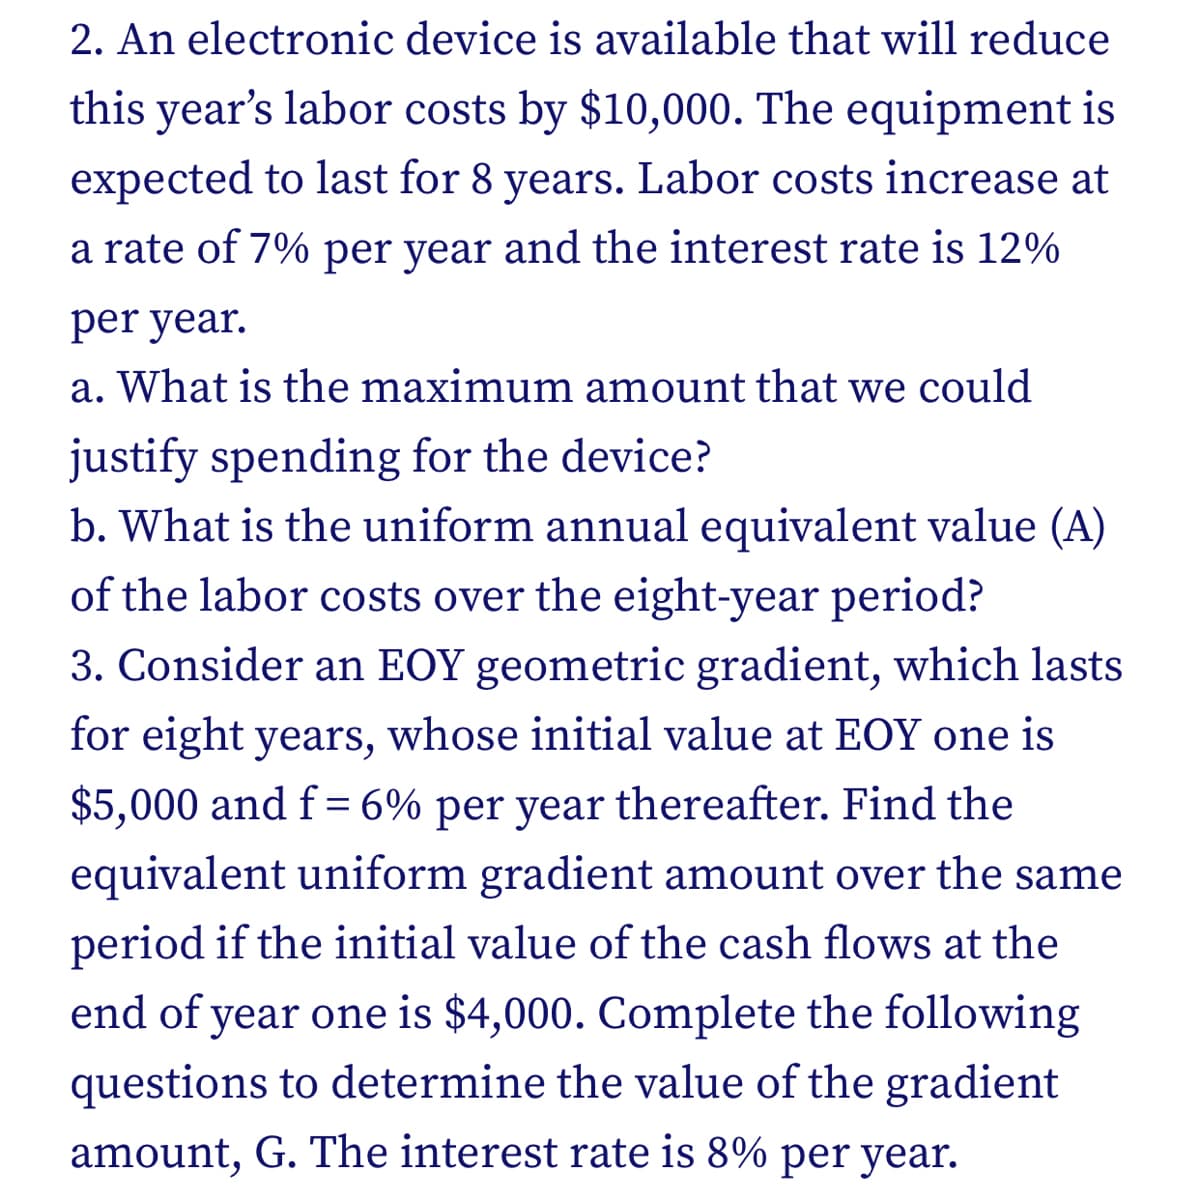 2. An electronic device is available that will reduce
this year's labor costs by $10,000. The equipment is
expected to last for 8 years. Labor costs increase at
a rate of 7% per year and the interest rate is 12%
per year.
a. What is the maximum amount that we could
justify spending for the device?
b. What is the uniform annual equivalent value (A)
of the labor costs over the eight-year period?
3. Consider an EOY geometric gradient, which lasts
for eight years, whose initial value at EOY one is
$5,000 and f= 6% per year thereafter. Find the
equivalent uniform gradient amount over the same
period if the initial value of the cash flows at the
end of year one is $4,000. Complete the following
questions to determine the value of the gradient
amount, G. The interest rate is 8% per year.
